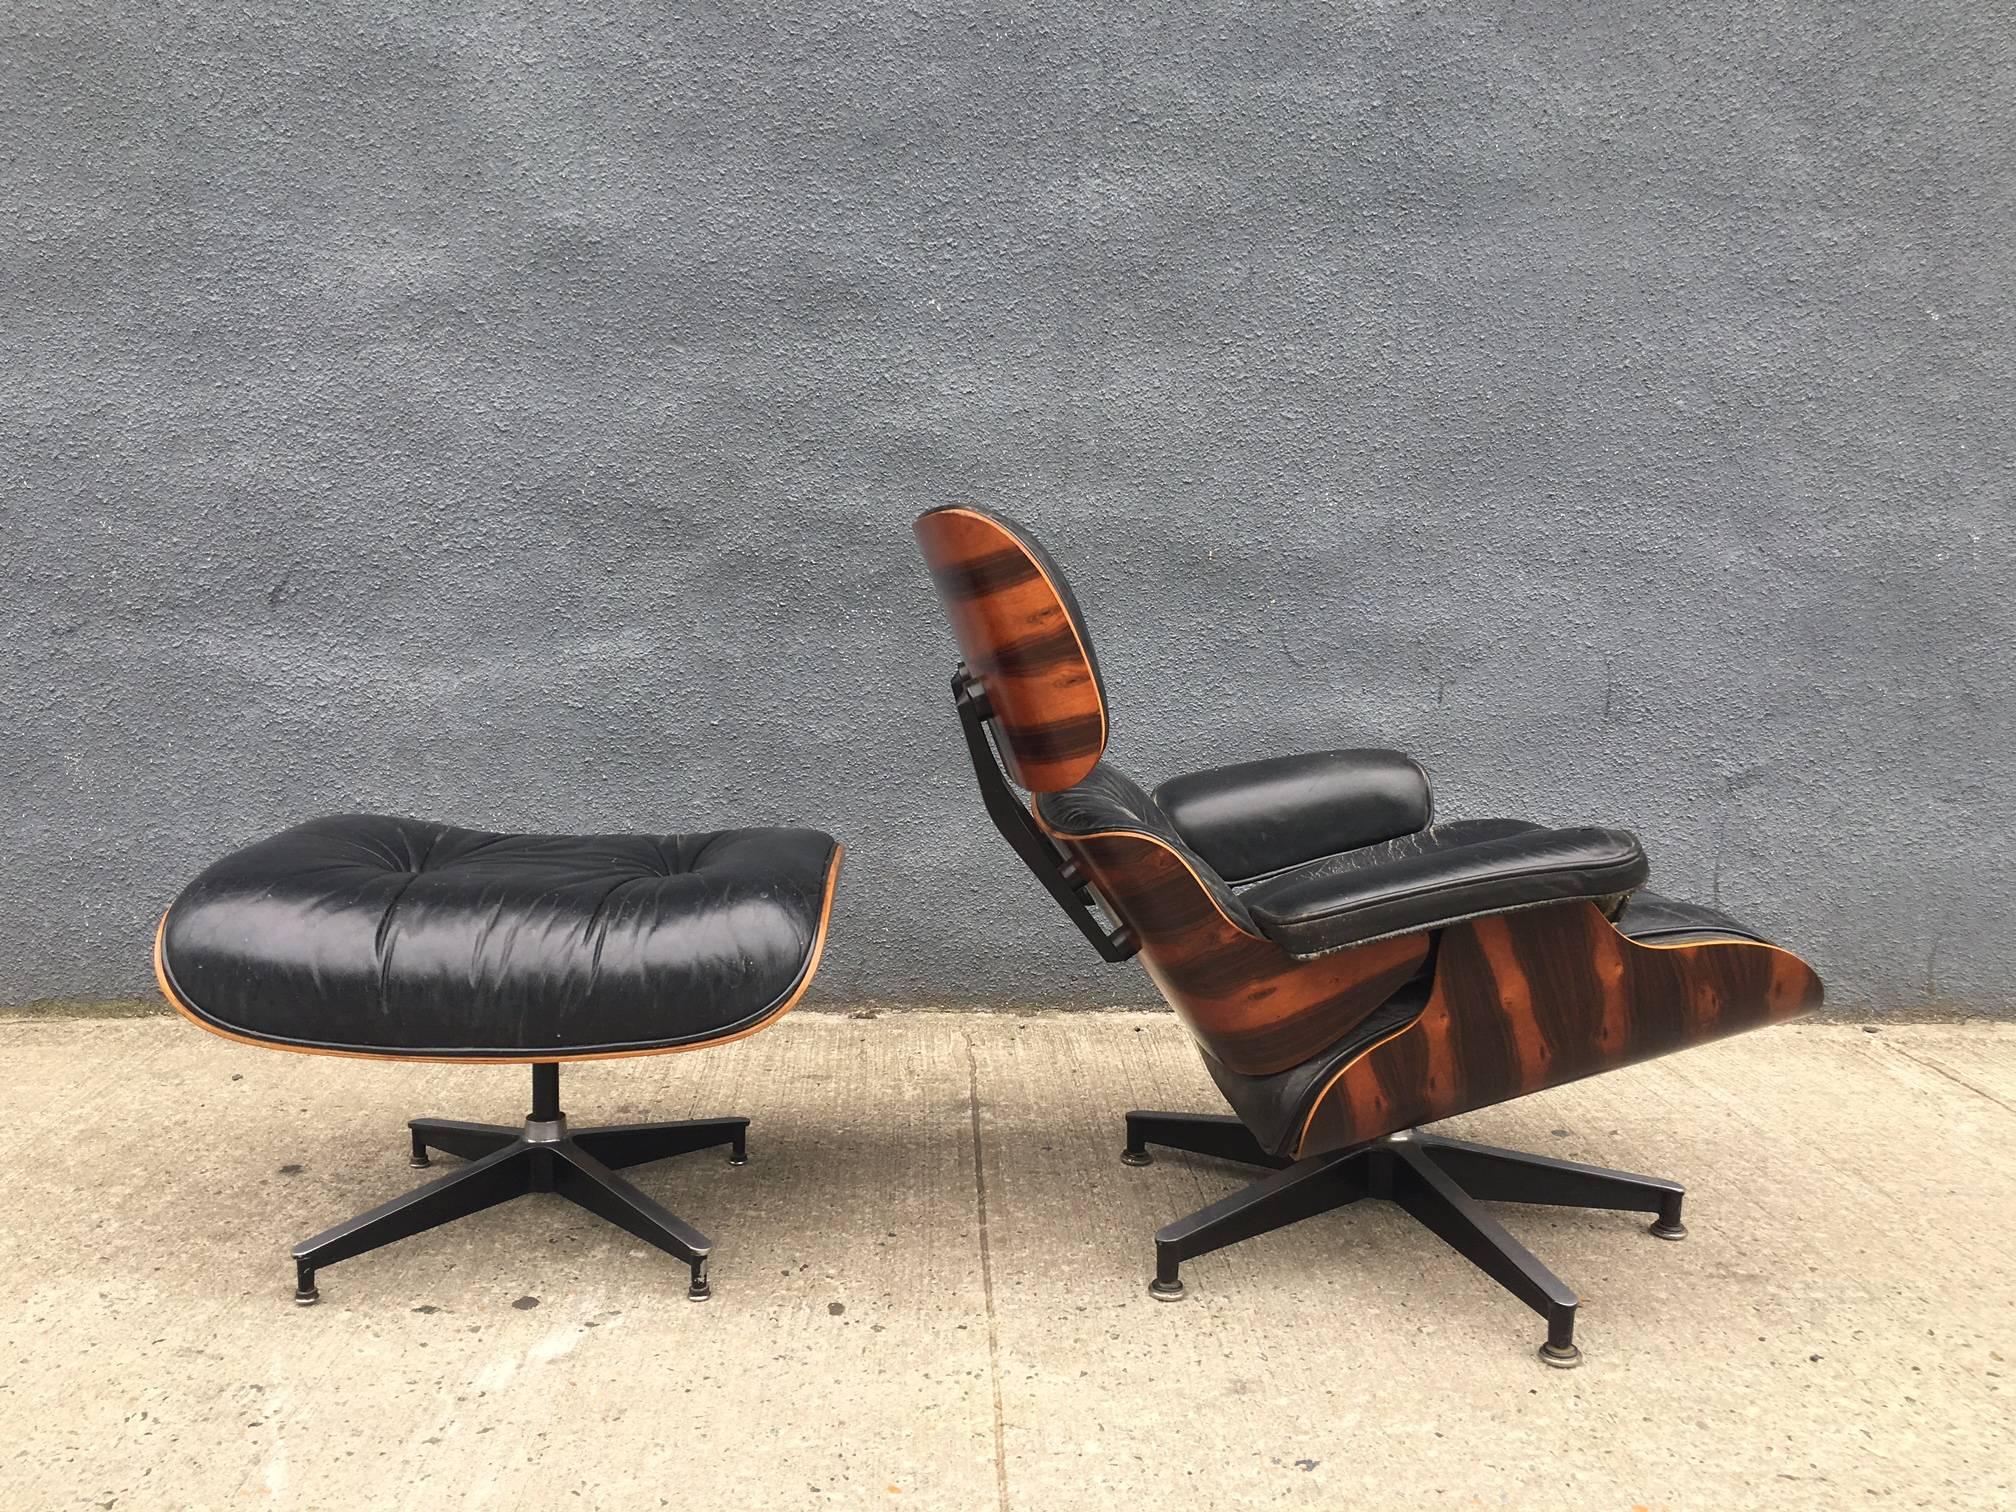 Hello collectors!

Up for sale is an authentic Herman Miller Eames lounge chair and ottoman in the coveted Brazilian rosewood. This is a very special example of this iconic Mid-Century Modern chair. The Brazilian rosewood shells — discontinued